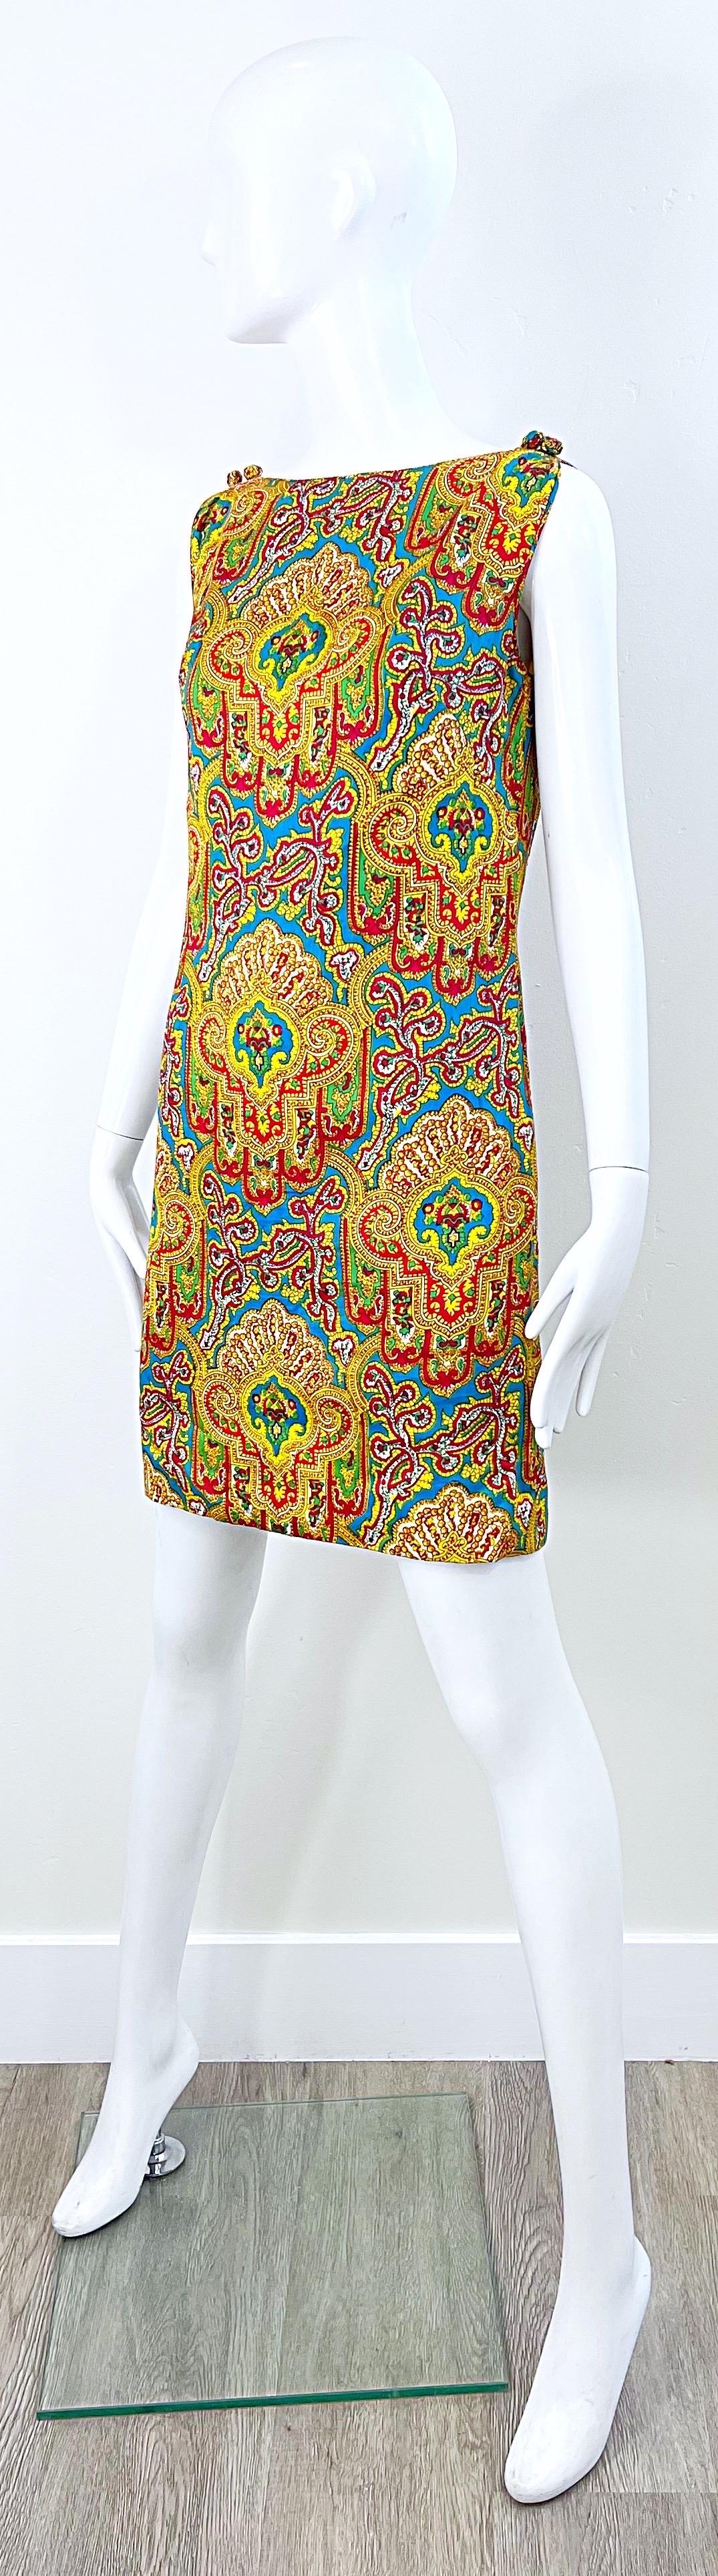 Women's 1960s Dynasty Paisley Bright Colorful Silk Vintage 60s Sleeveless Shift Dress For Sale